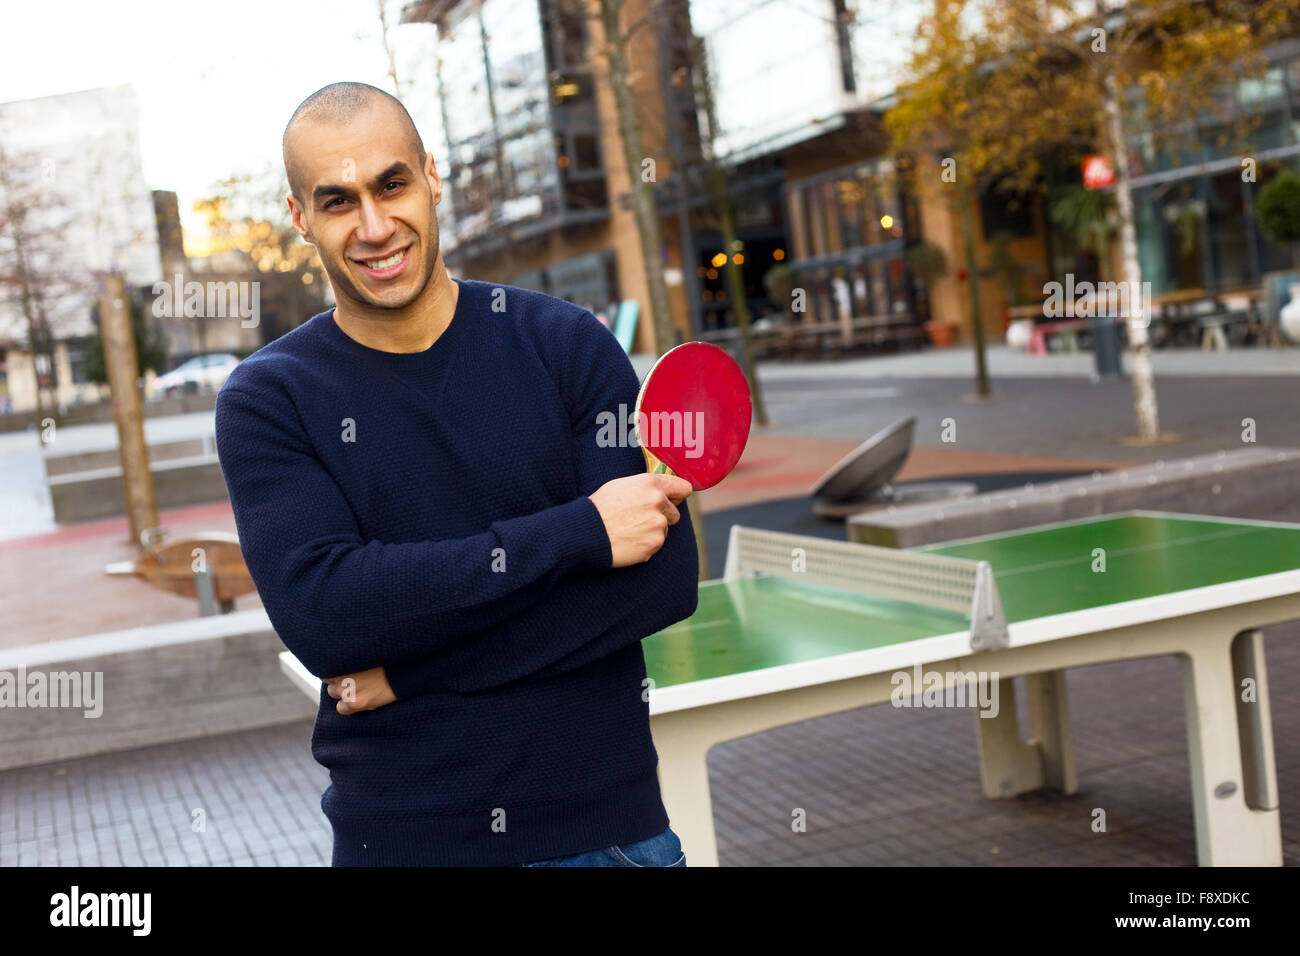 young man posing holding a table tennis racket Stock Photo